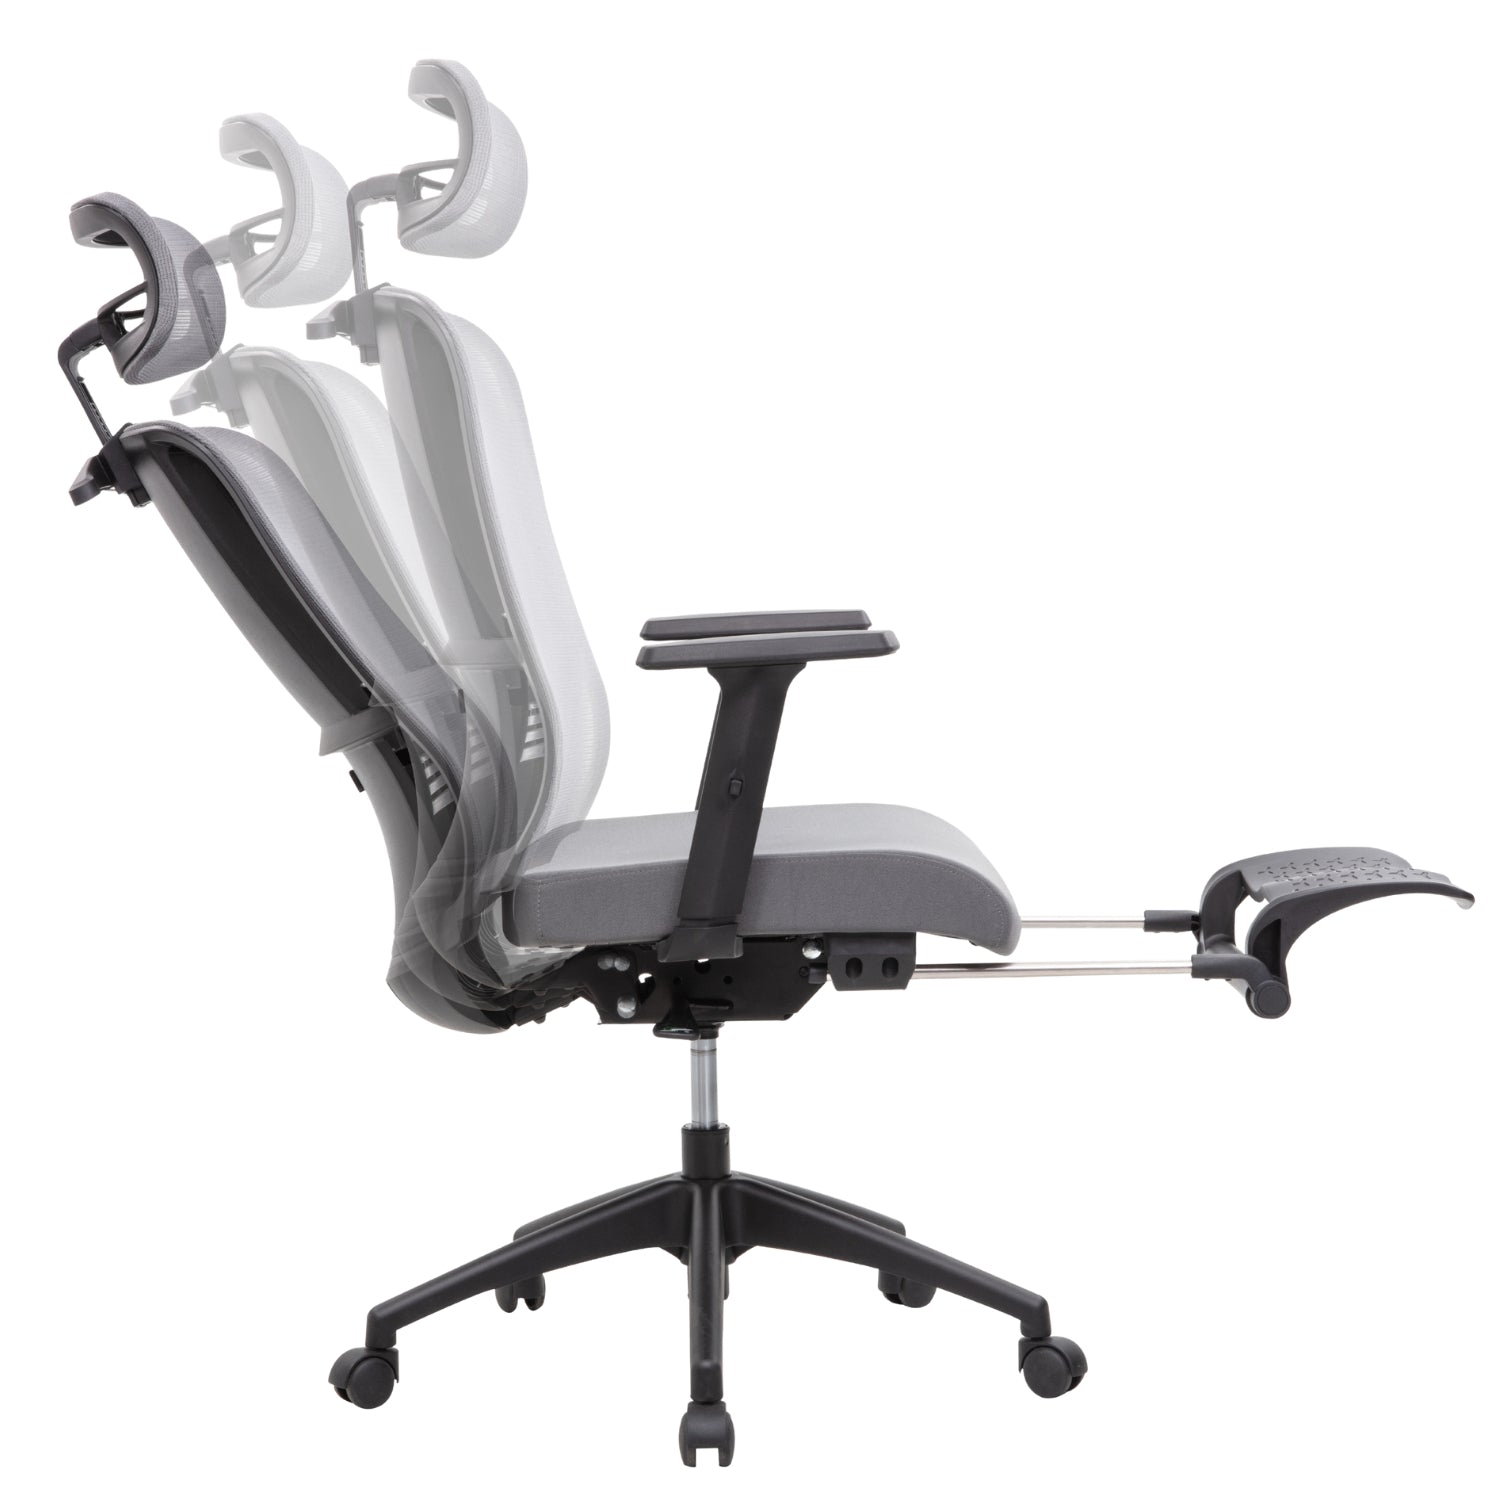 Kyona mesh grey office chair with a footrest and adjustable reclining providing comfort and support for long hours of work.